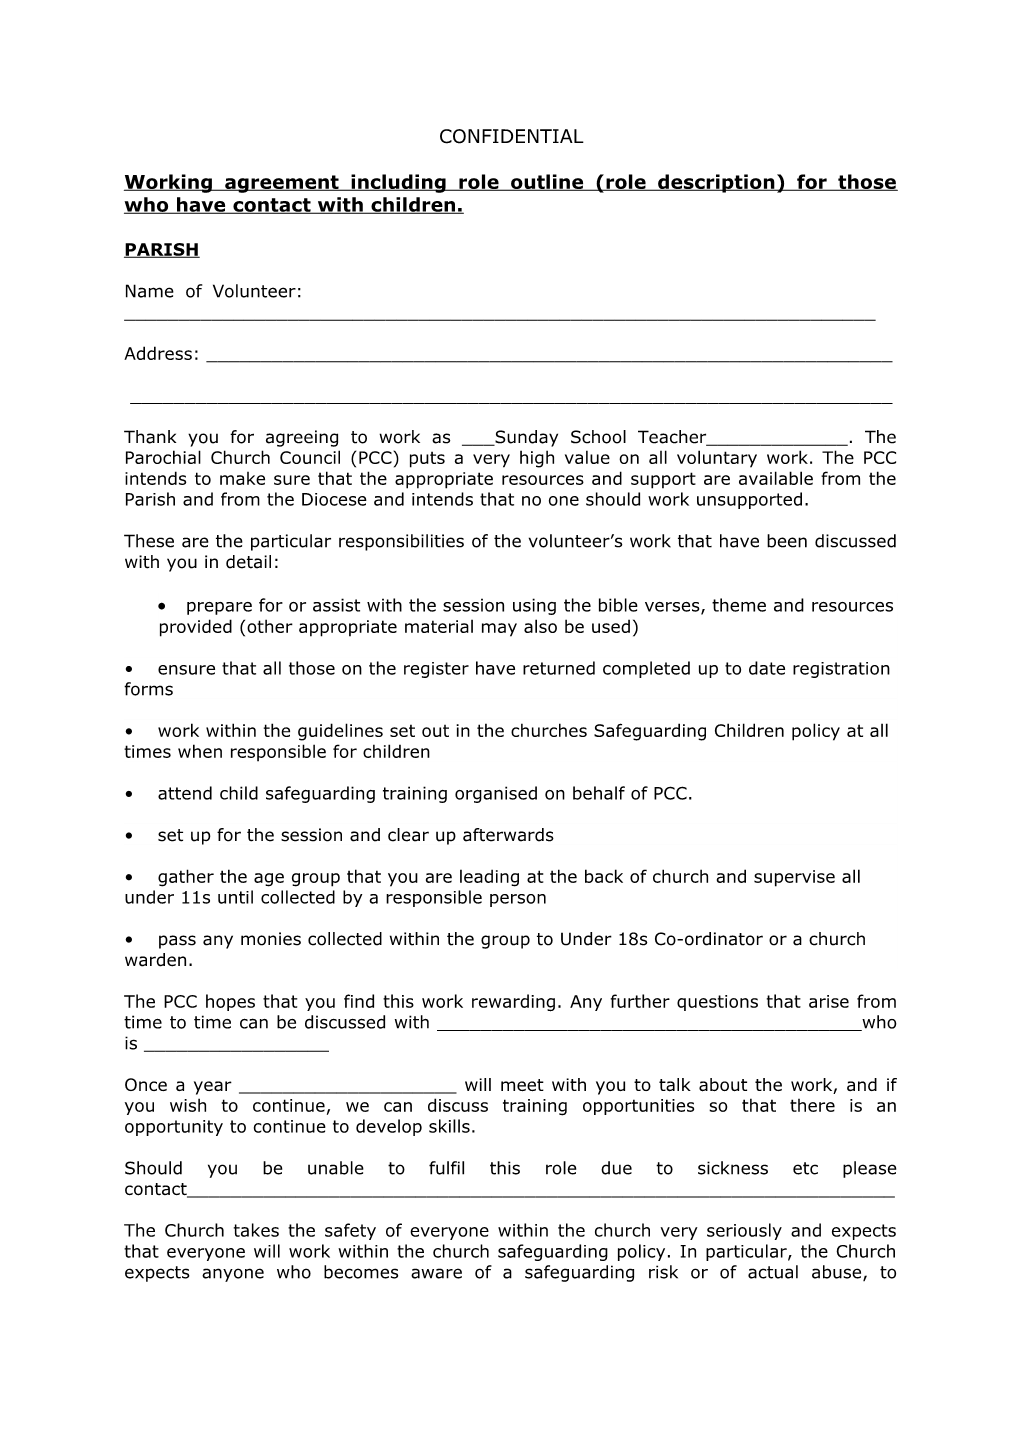 Working Agreement Including Role Outline (Role Description) for Those Who Have Contact